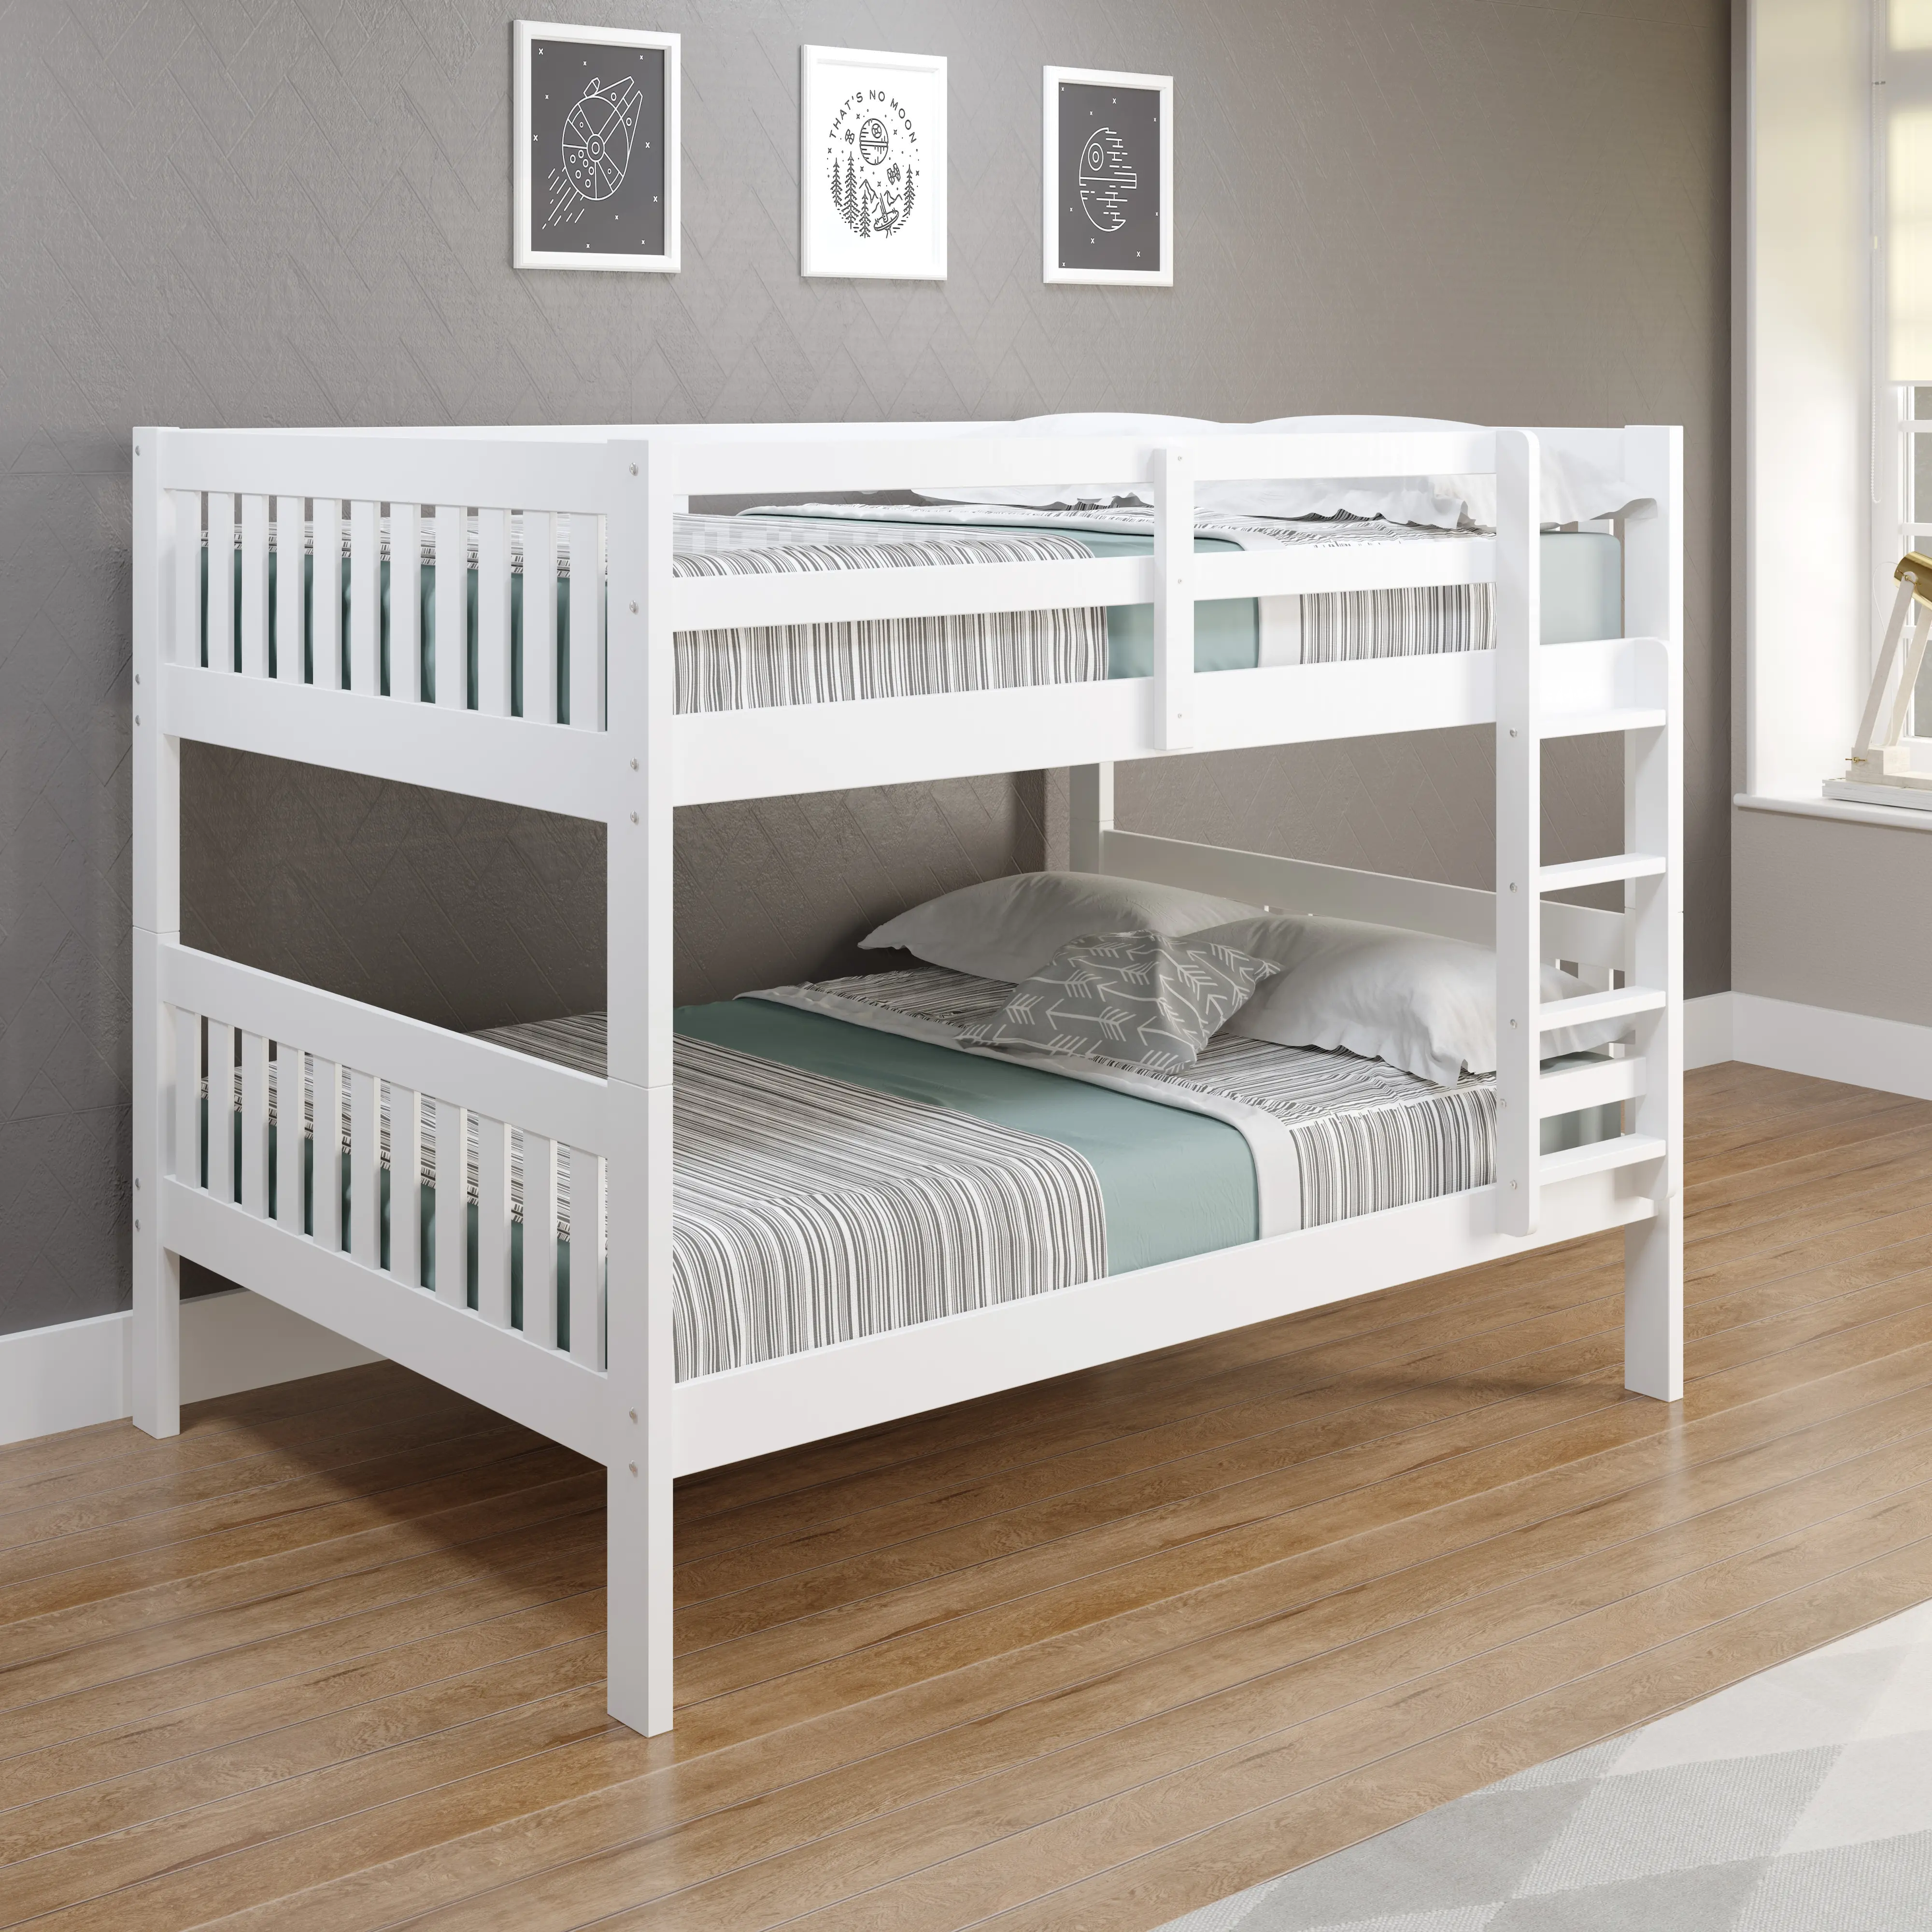 1015-3FFW Mission White Full-over-Full Bunk Bed sku 1015-3FFW